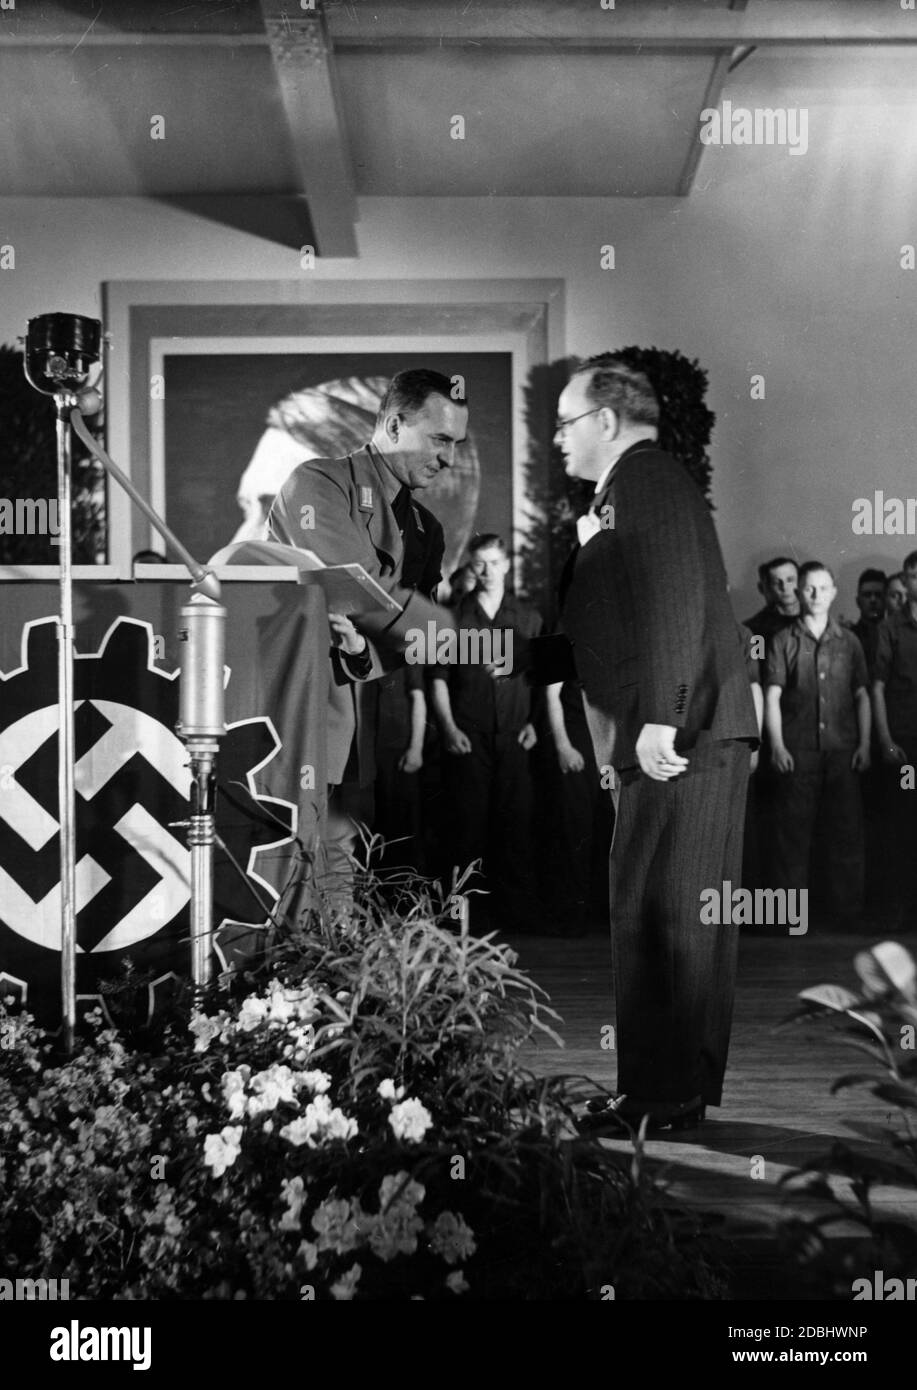 Alfred Spangenberg, Gauobmann (District Leader) of the DAF, presents Director Speck from the Werkzeugfabrik R. Stock & Co. in Berlin-Marienfelde with an award certificate as a DAF achievement badge for the vocational training. In the background there is a larger-than-life portrait of Adolf Hitler and several apprentices. Stock Photo